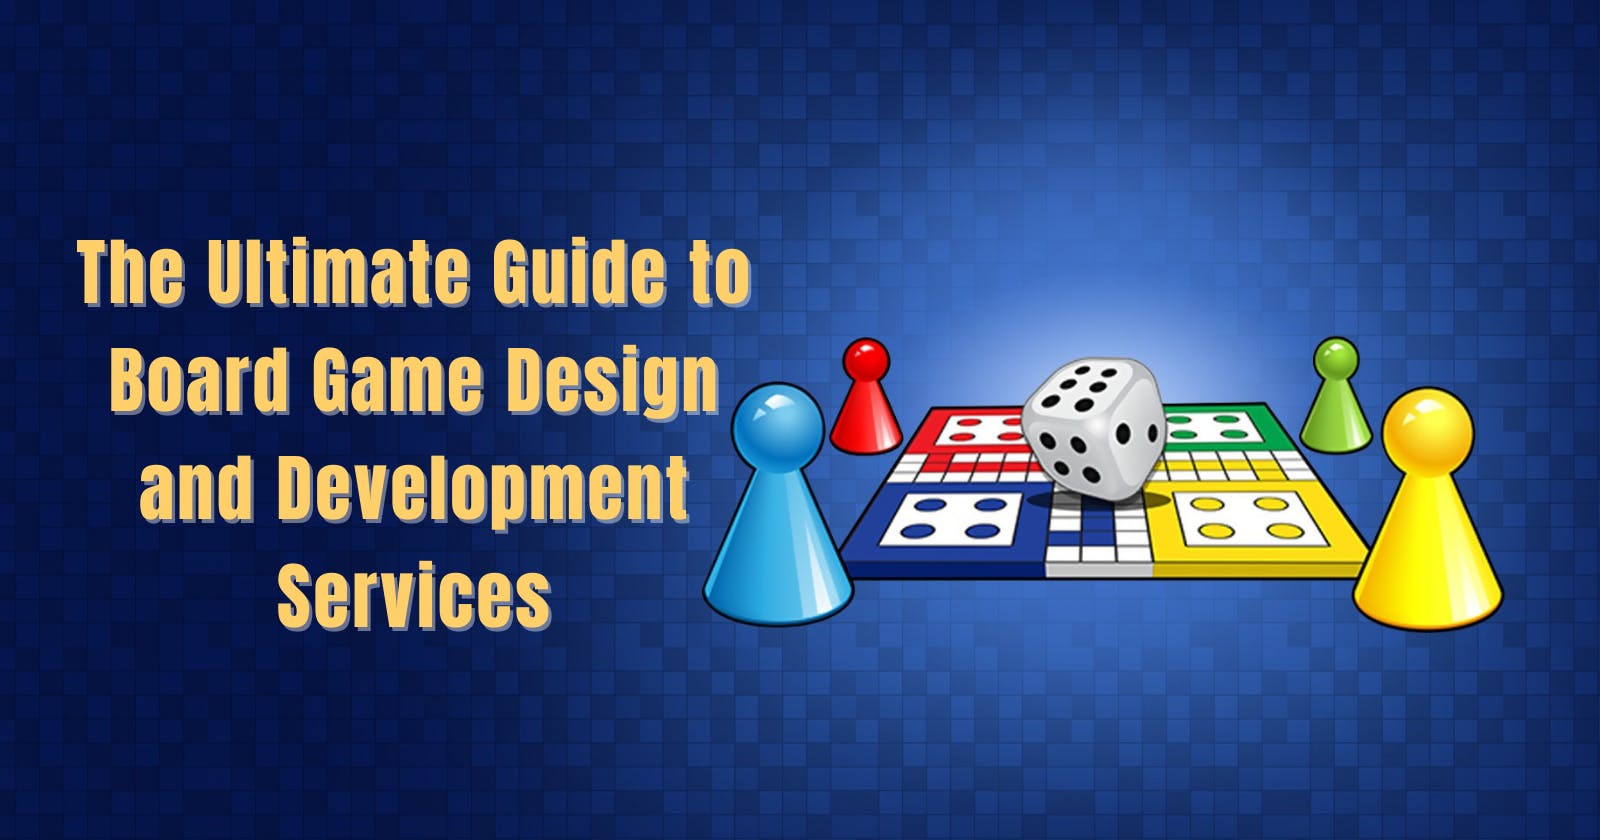 The Ultimate Guide to Board Game Design and Development Services